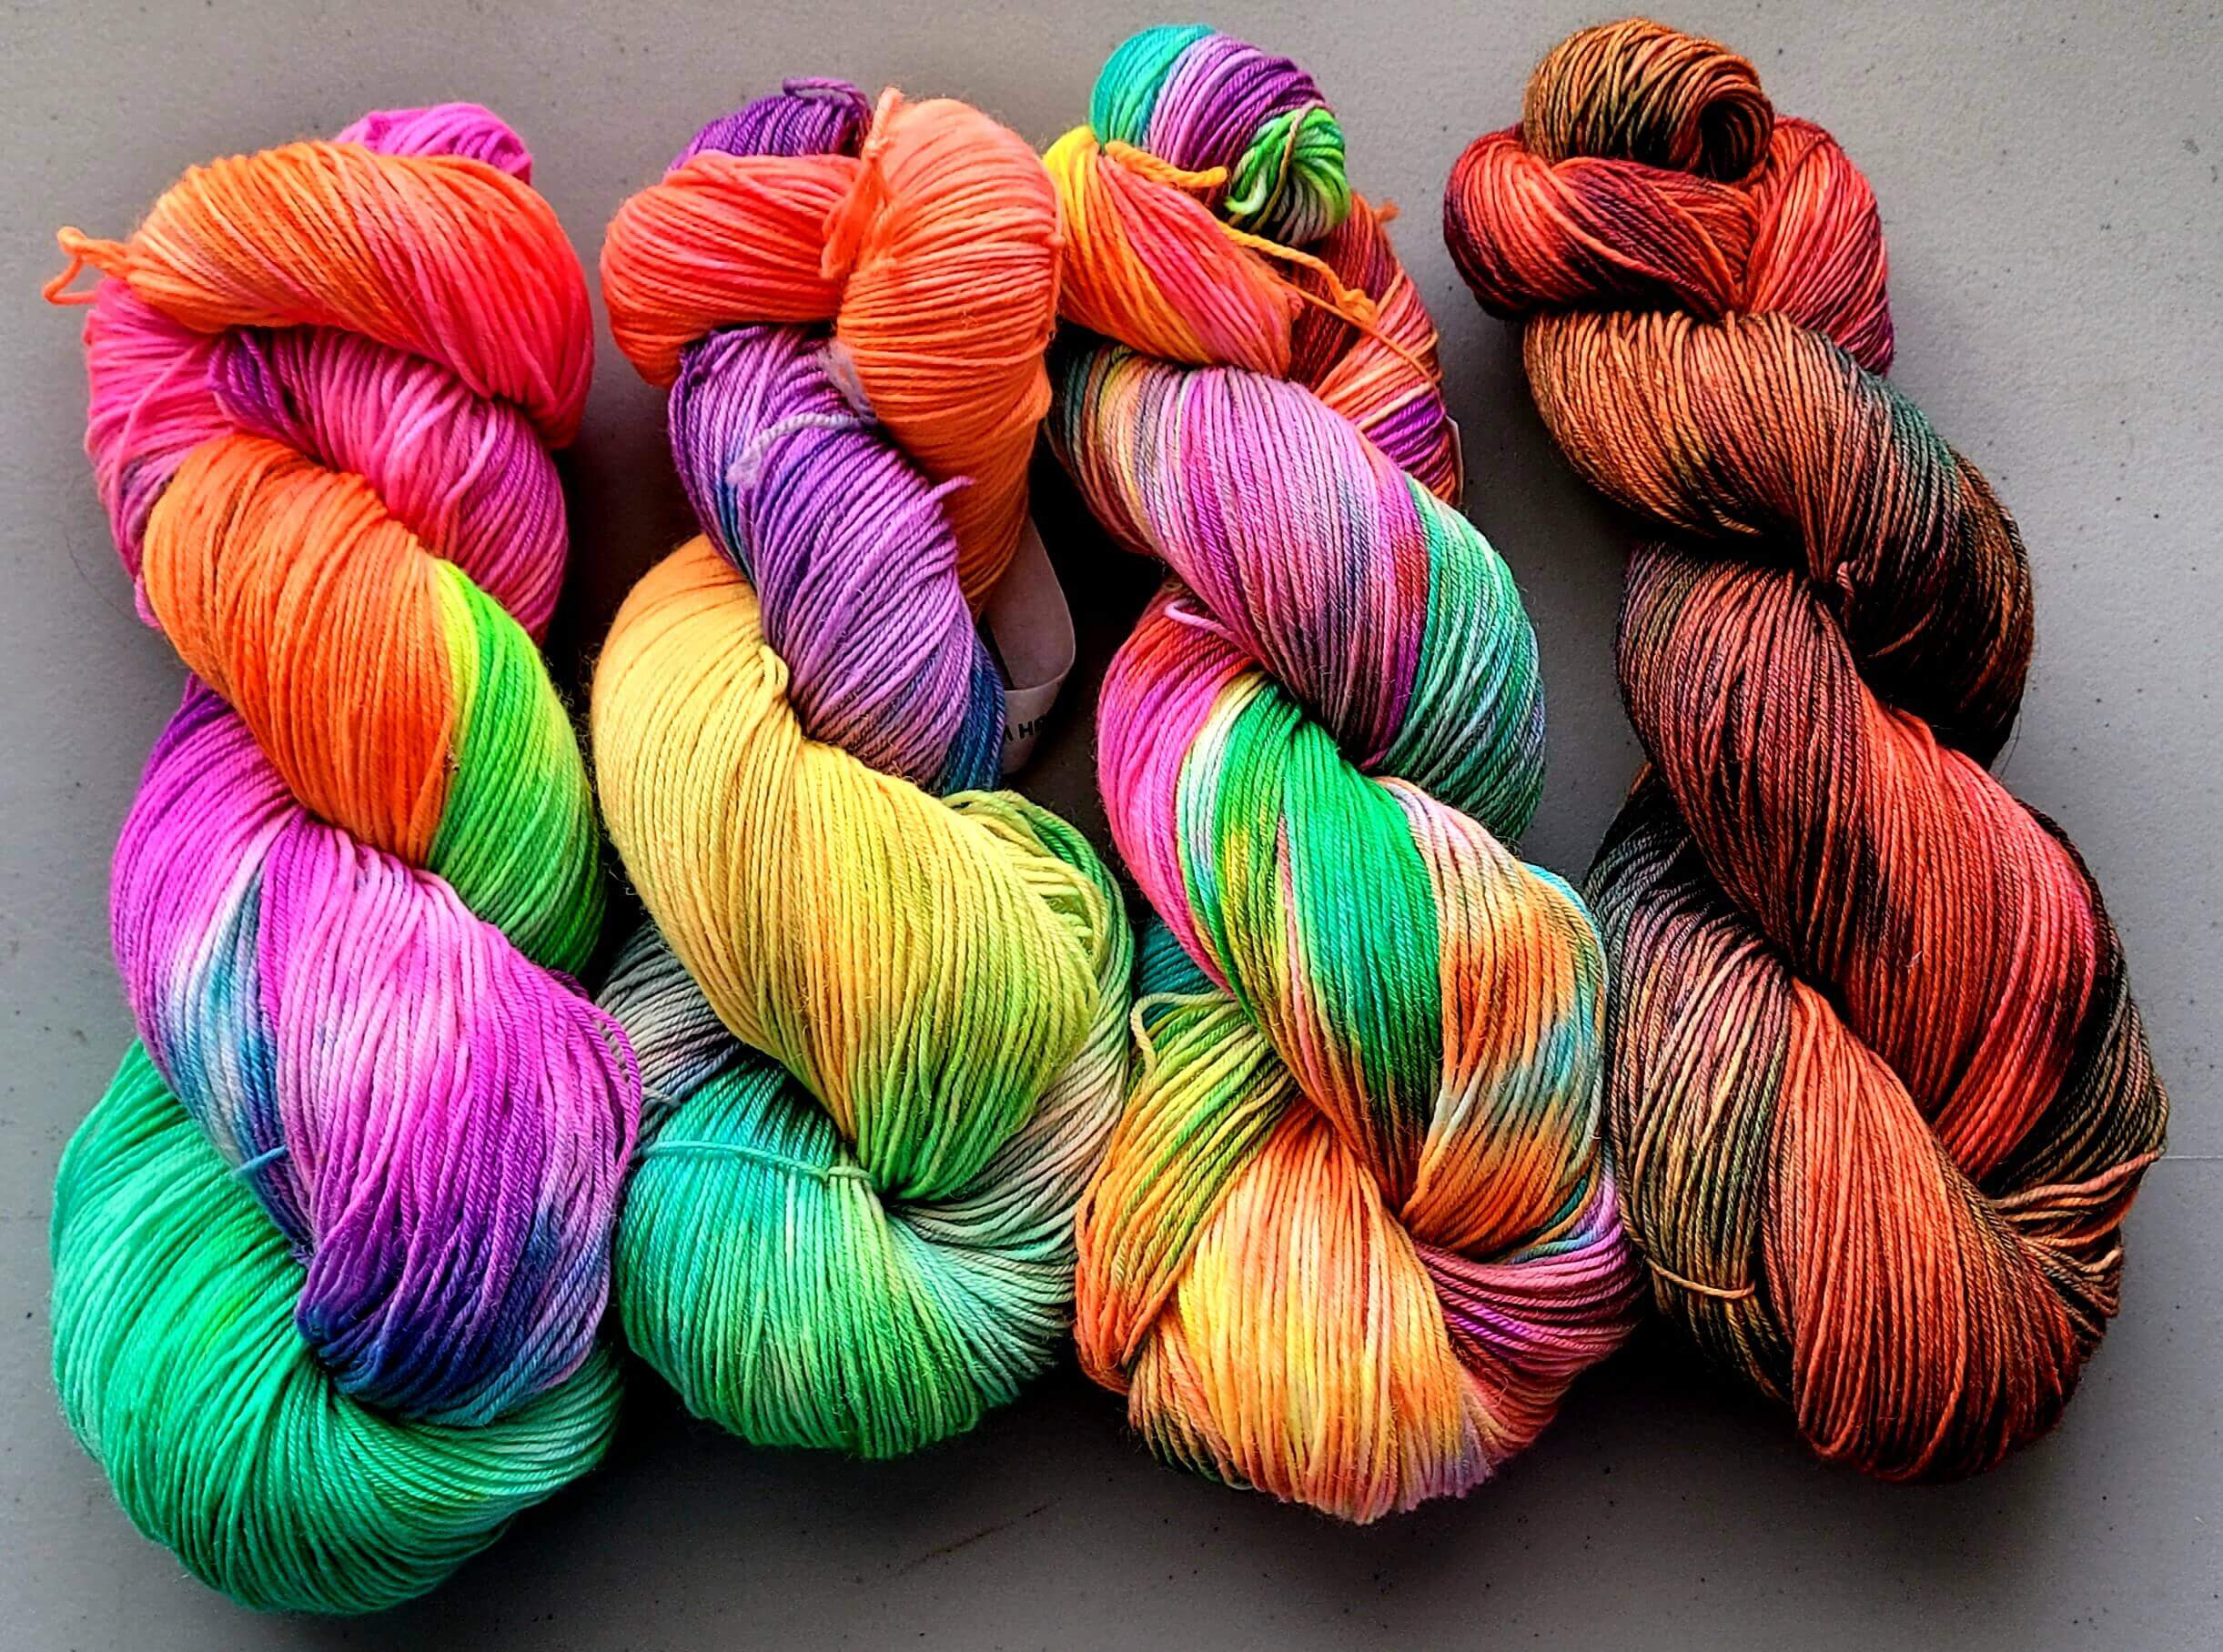 8 Ways to Kettle Dye Yarn (Part 1 of 2) - Knomad